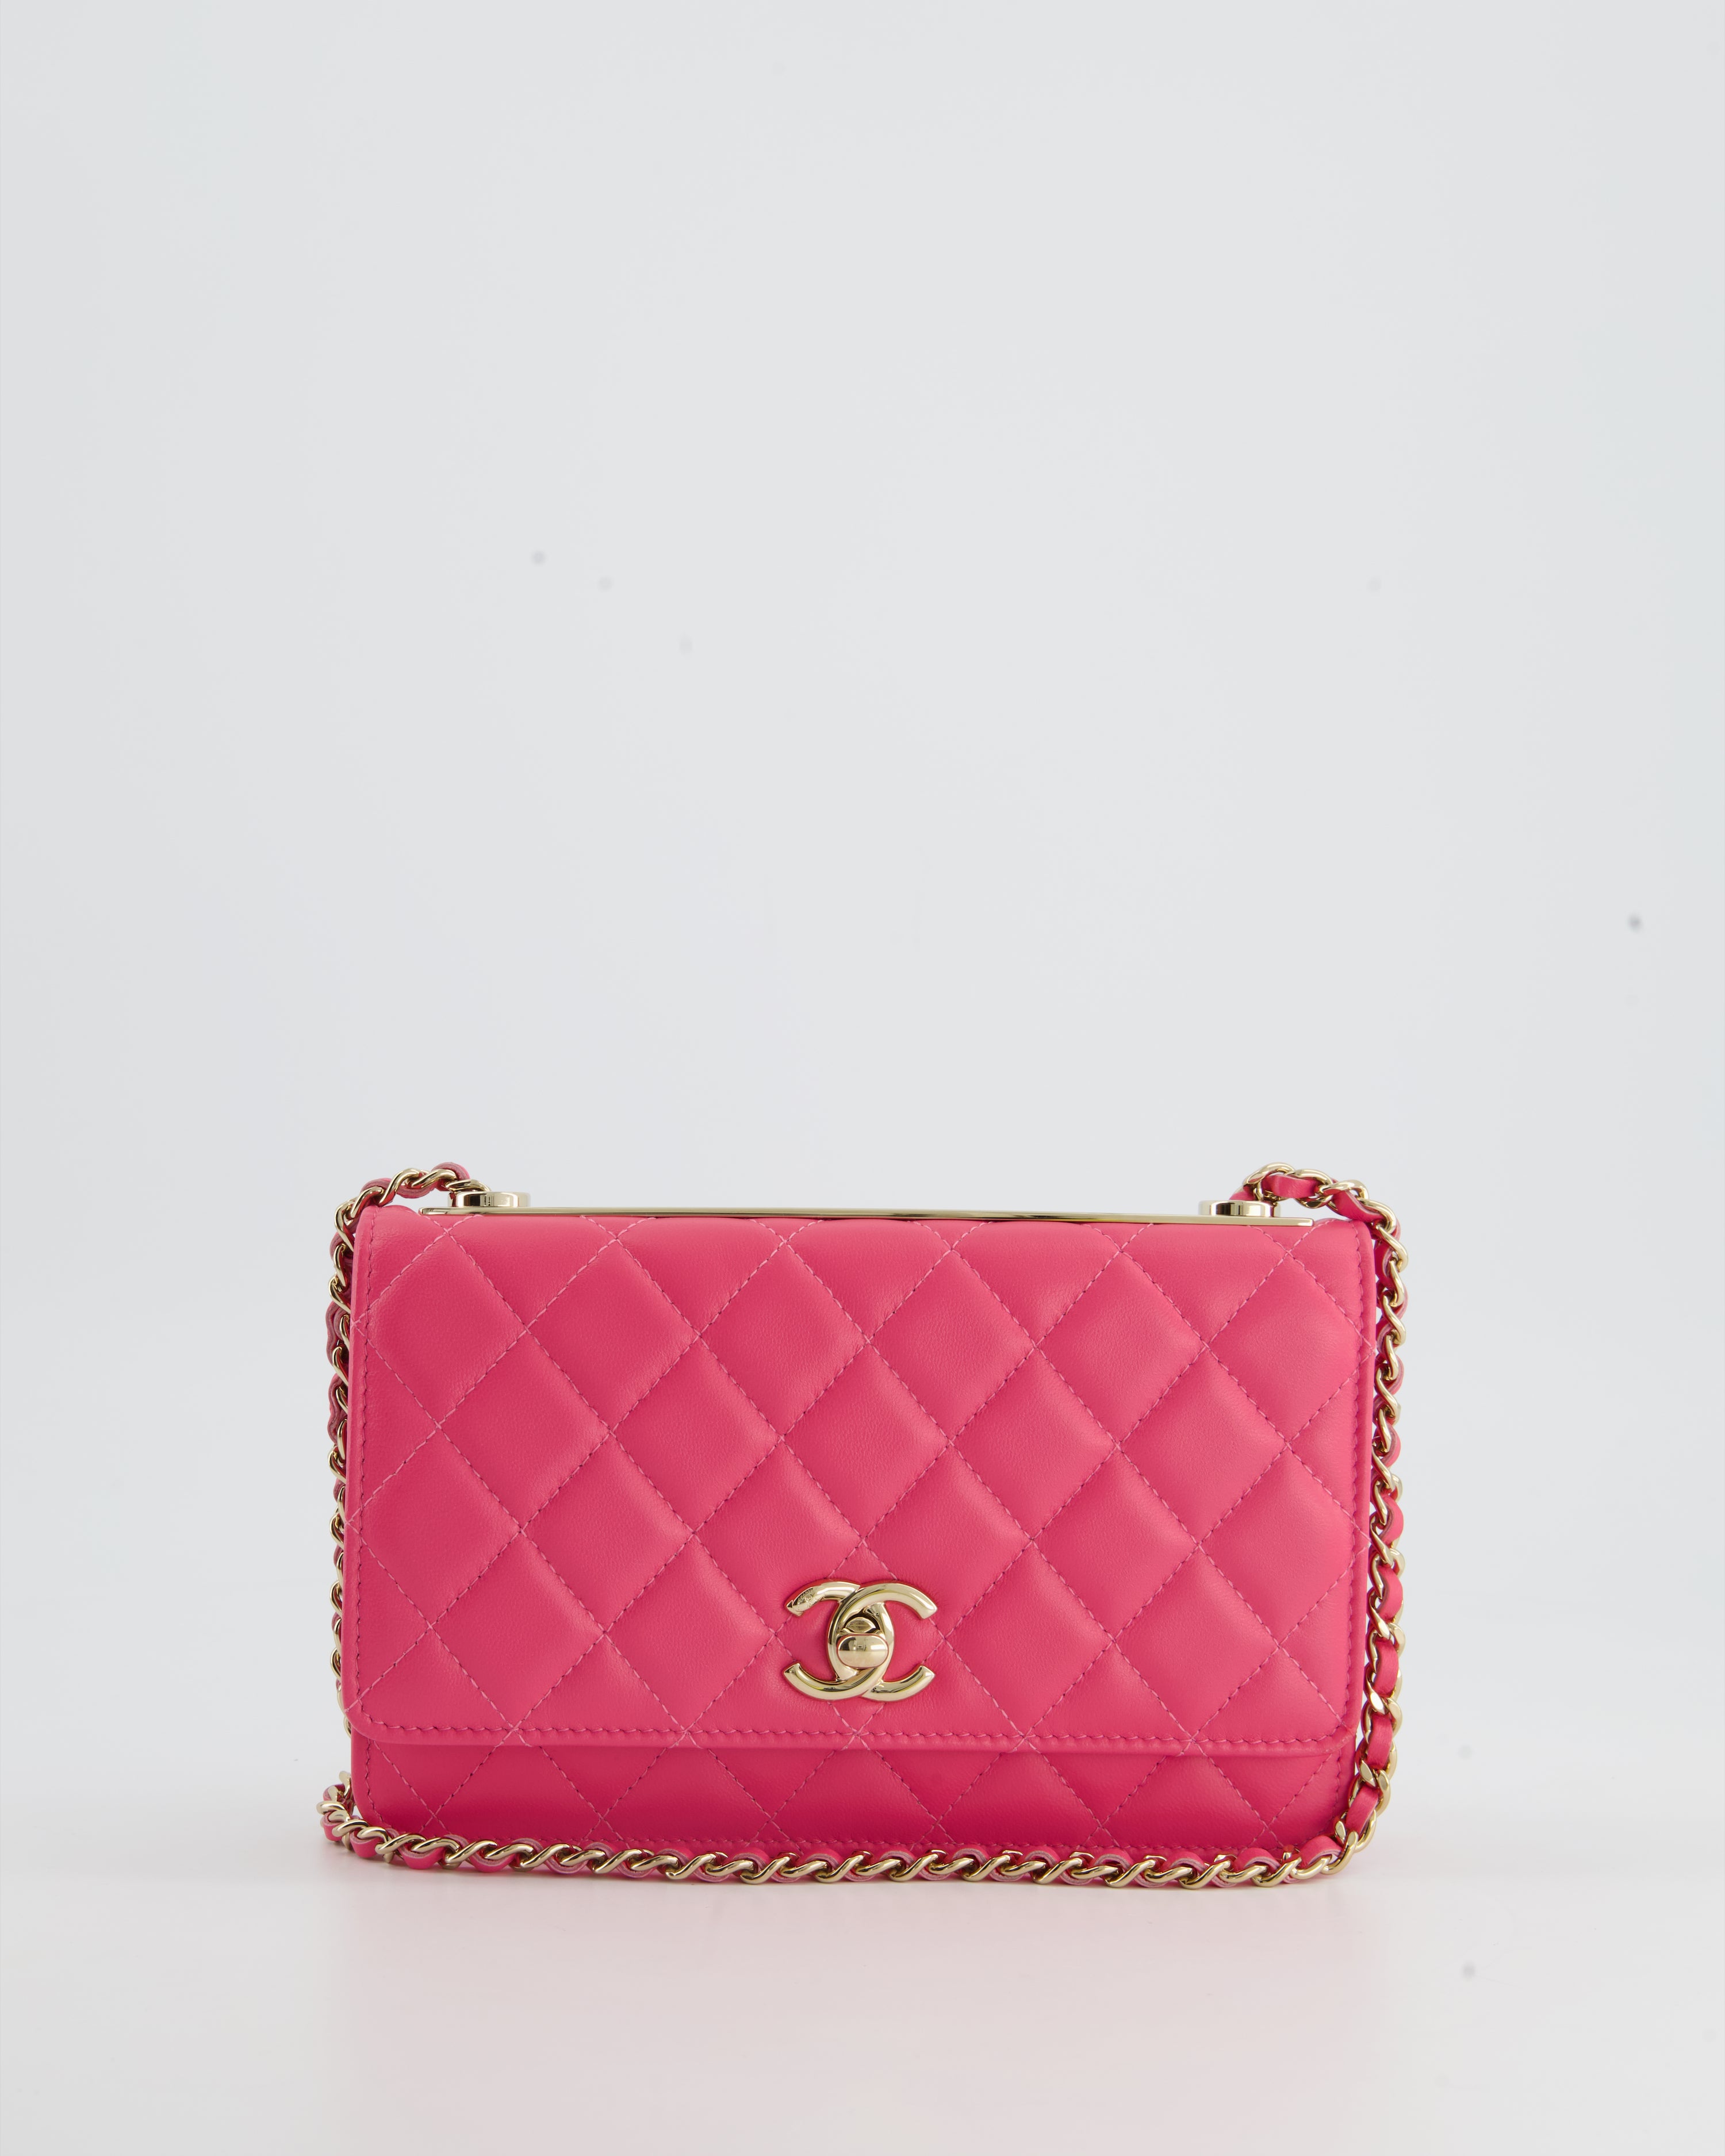 Chanel Blush Quilted Lambskin Double Zip Clutch with Chain Gold Hardware, 2018 (Very Good), Pink Womens Handbag